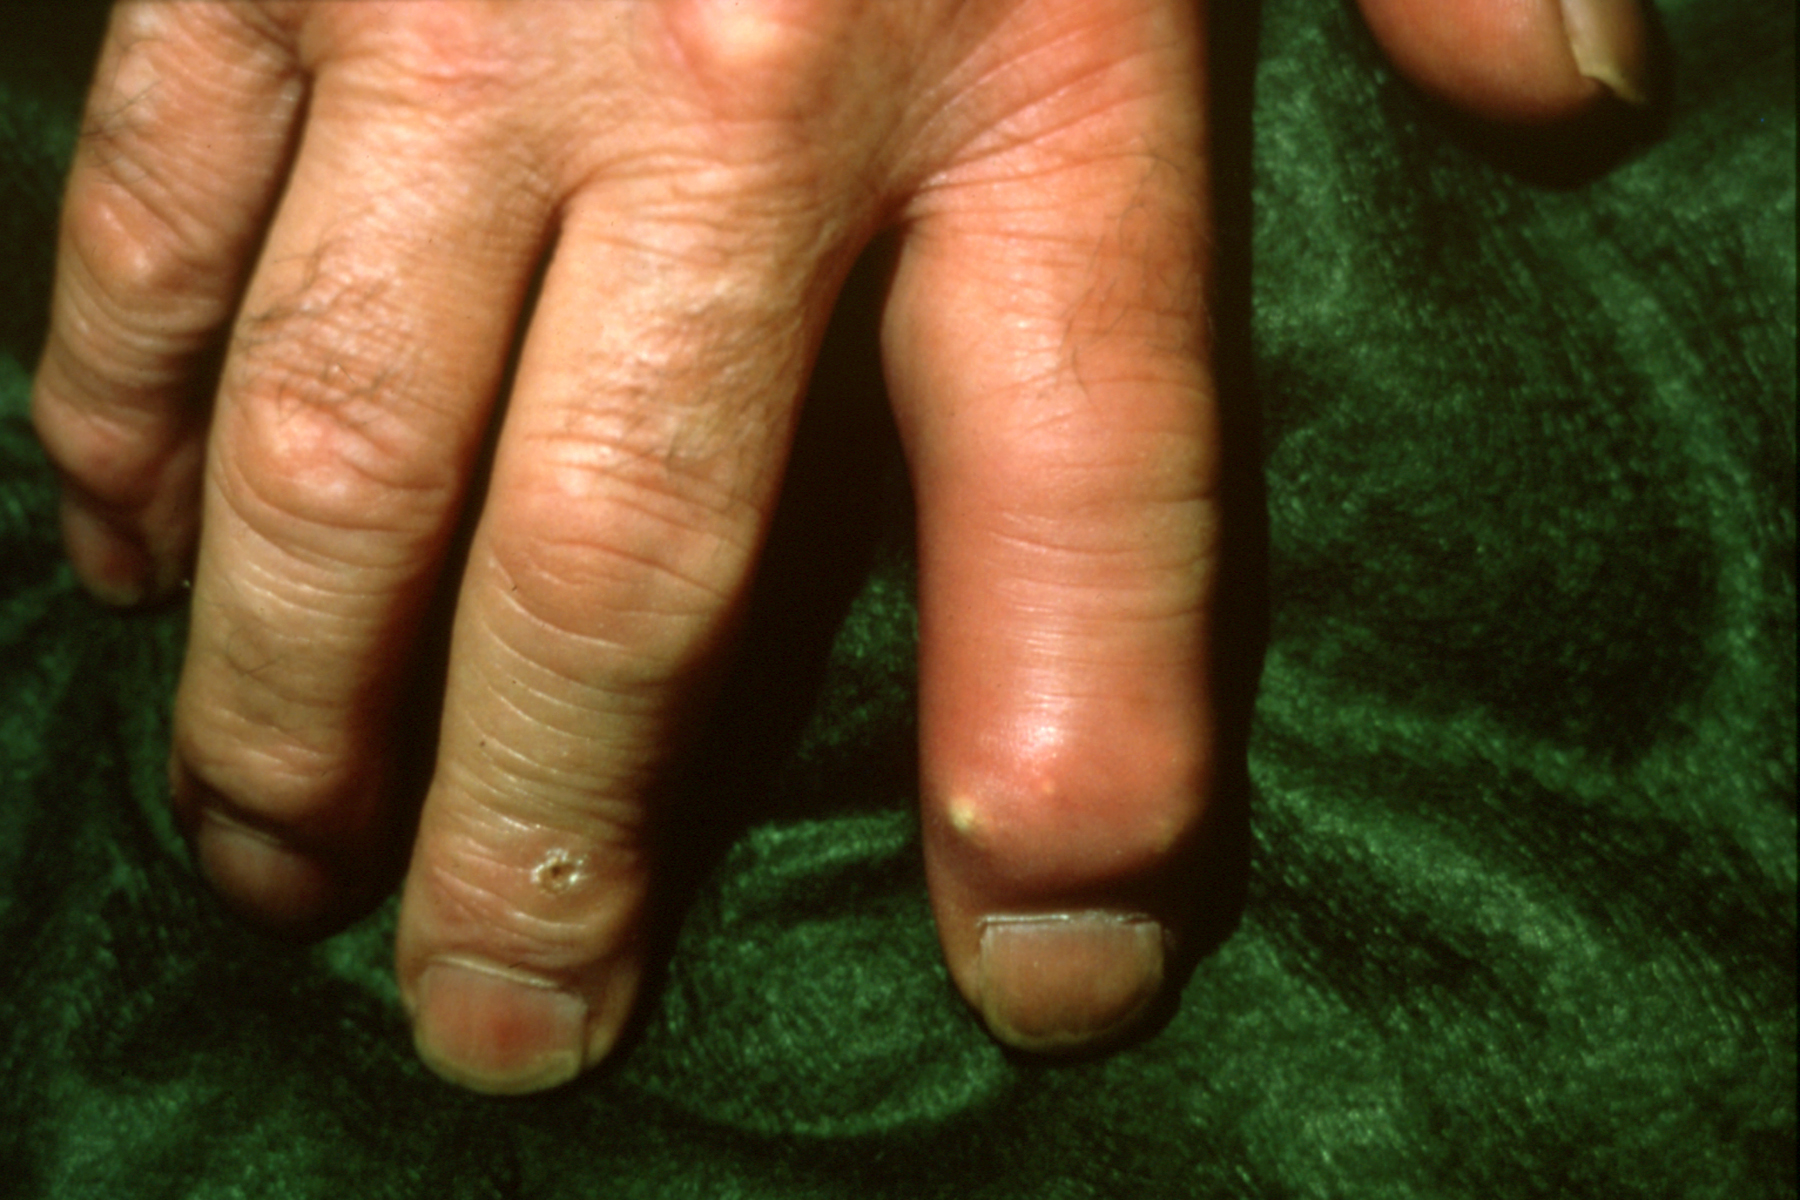 Gout at DIP presenting like a paronychia of the index finger.